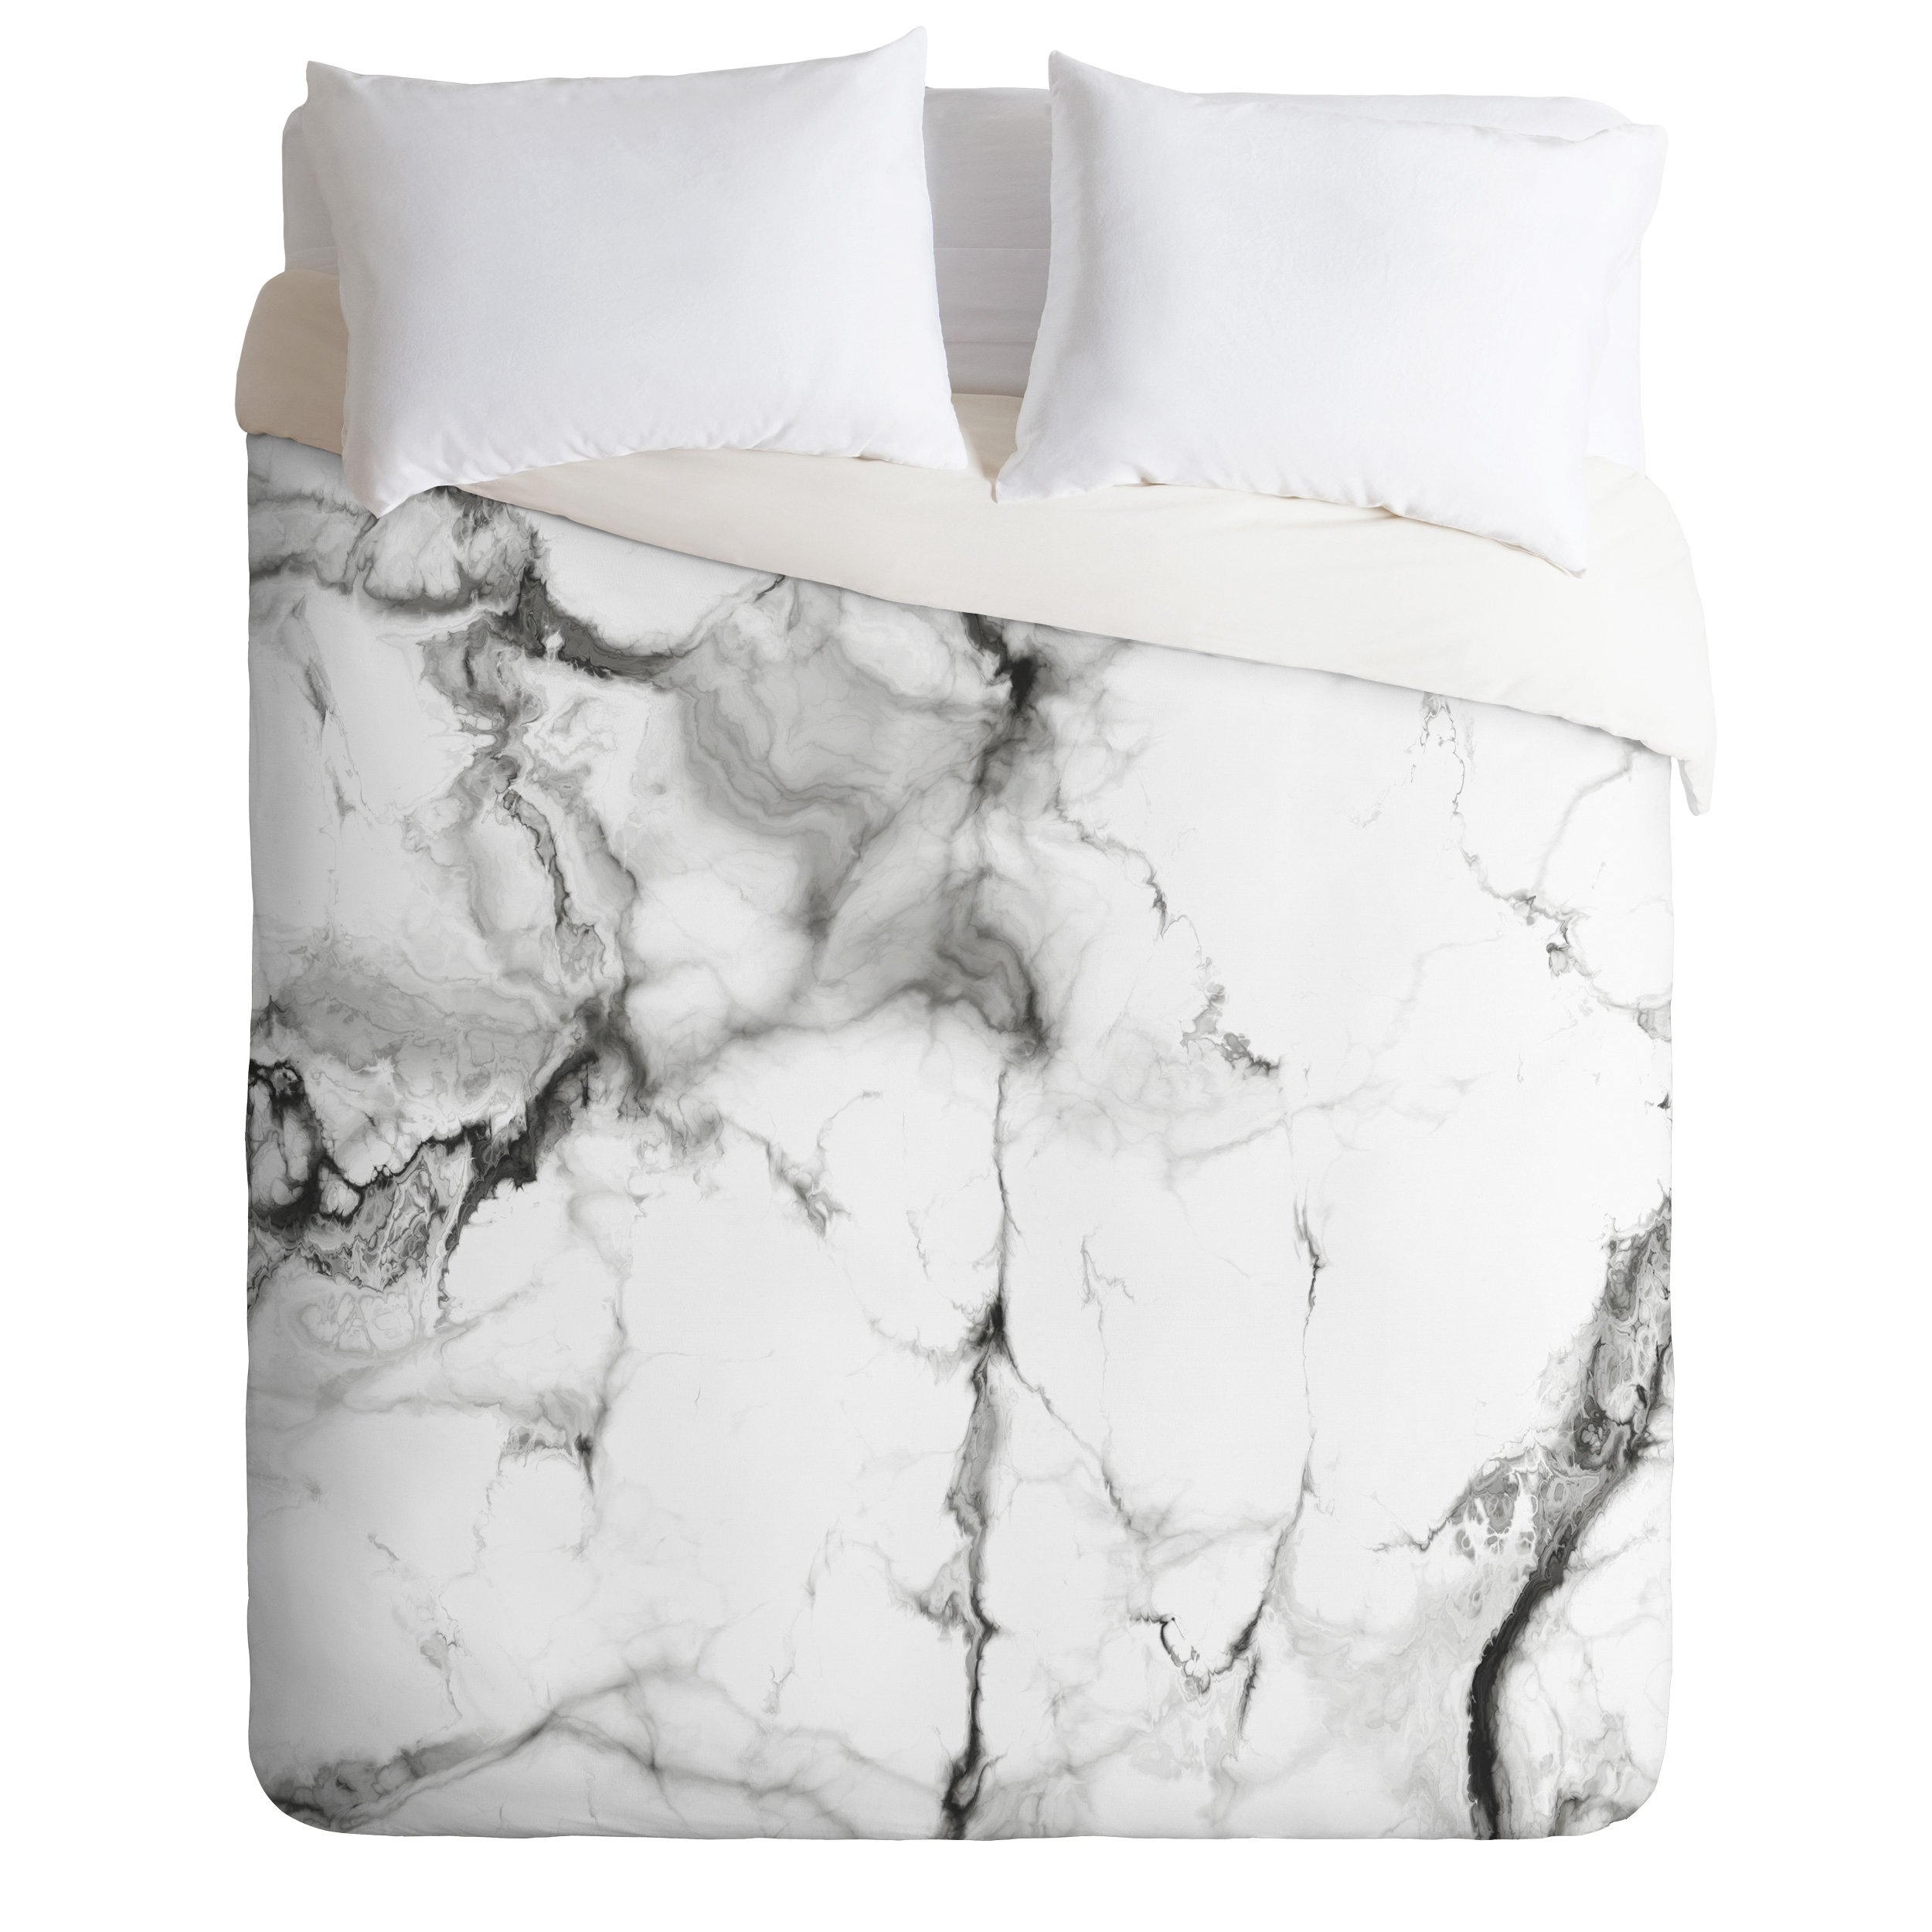 CHELSEA VICTORIA MARBLE DUVET COVER- King - Image 1